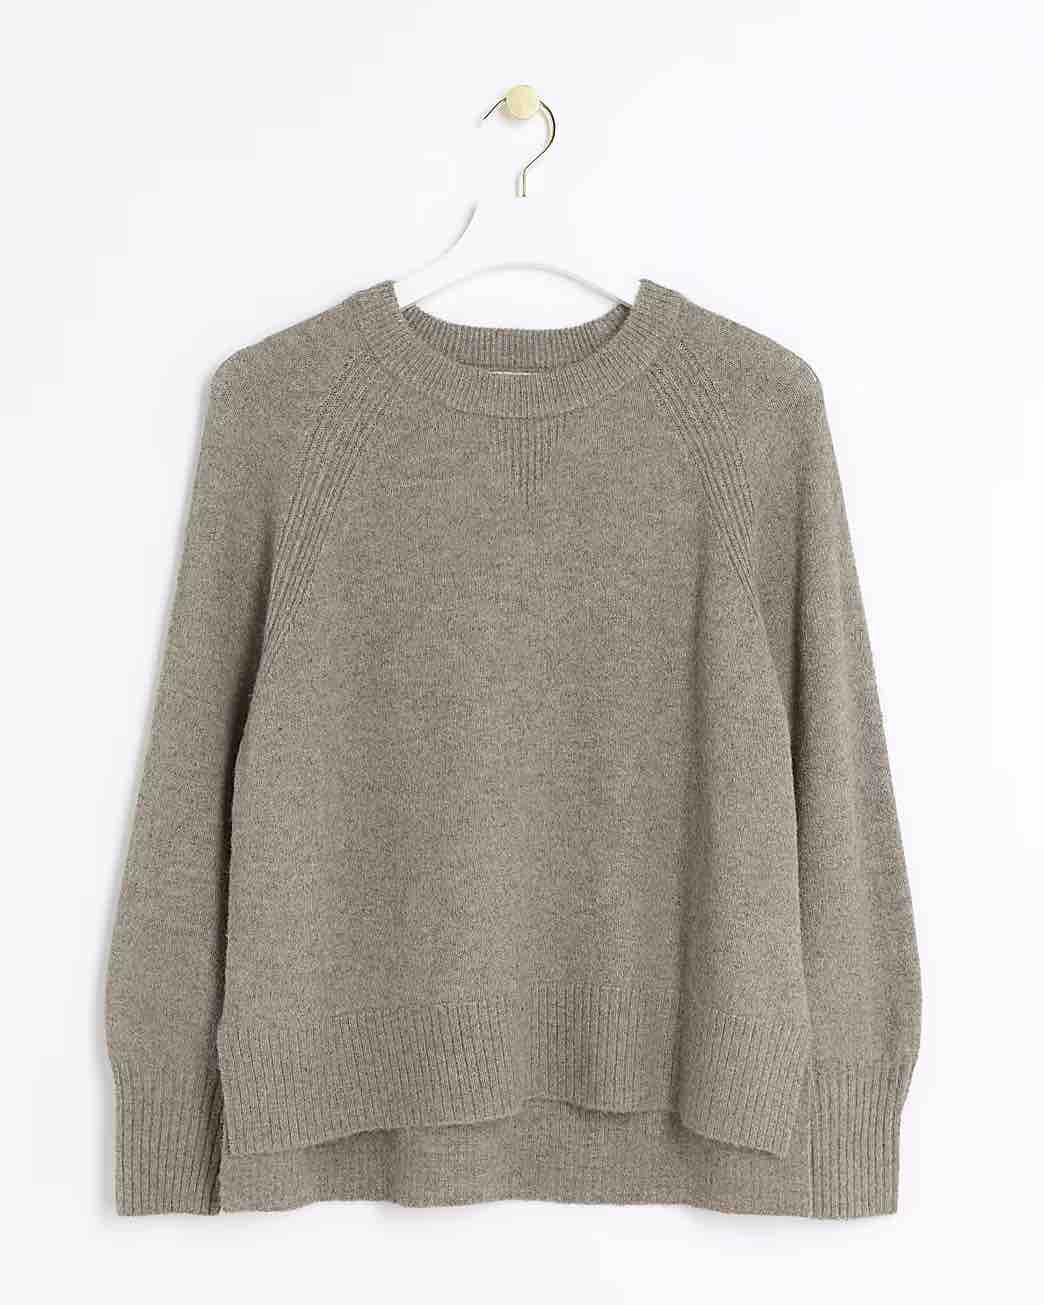 Five Things We Are Loving At River Island Knitted Crewneck Sweater staple pieces for your winter closet must have winter sweaters affordable sweater for winter nashville stylists share affordable winter pieces what to buy for your winter closet